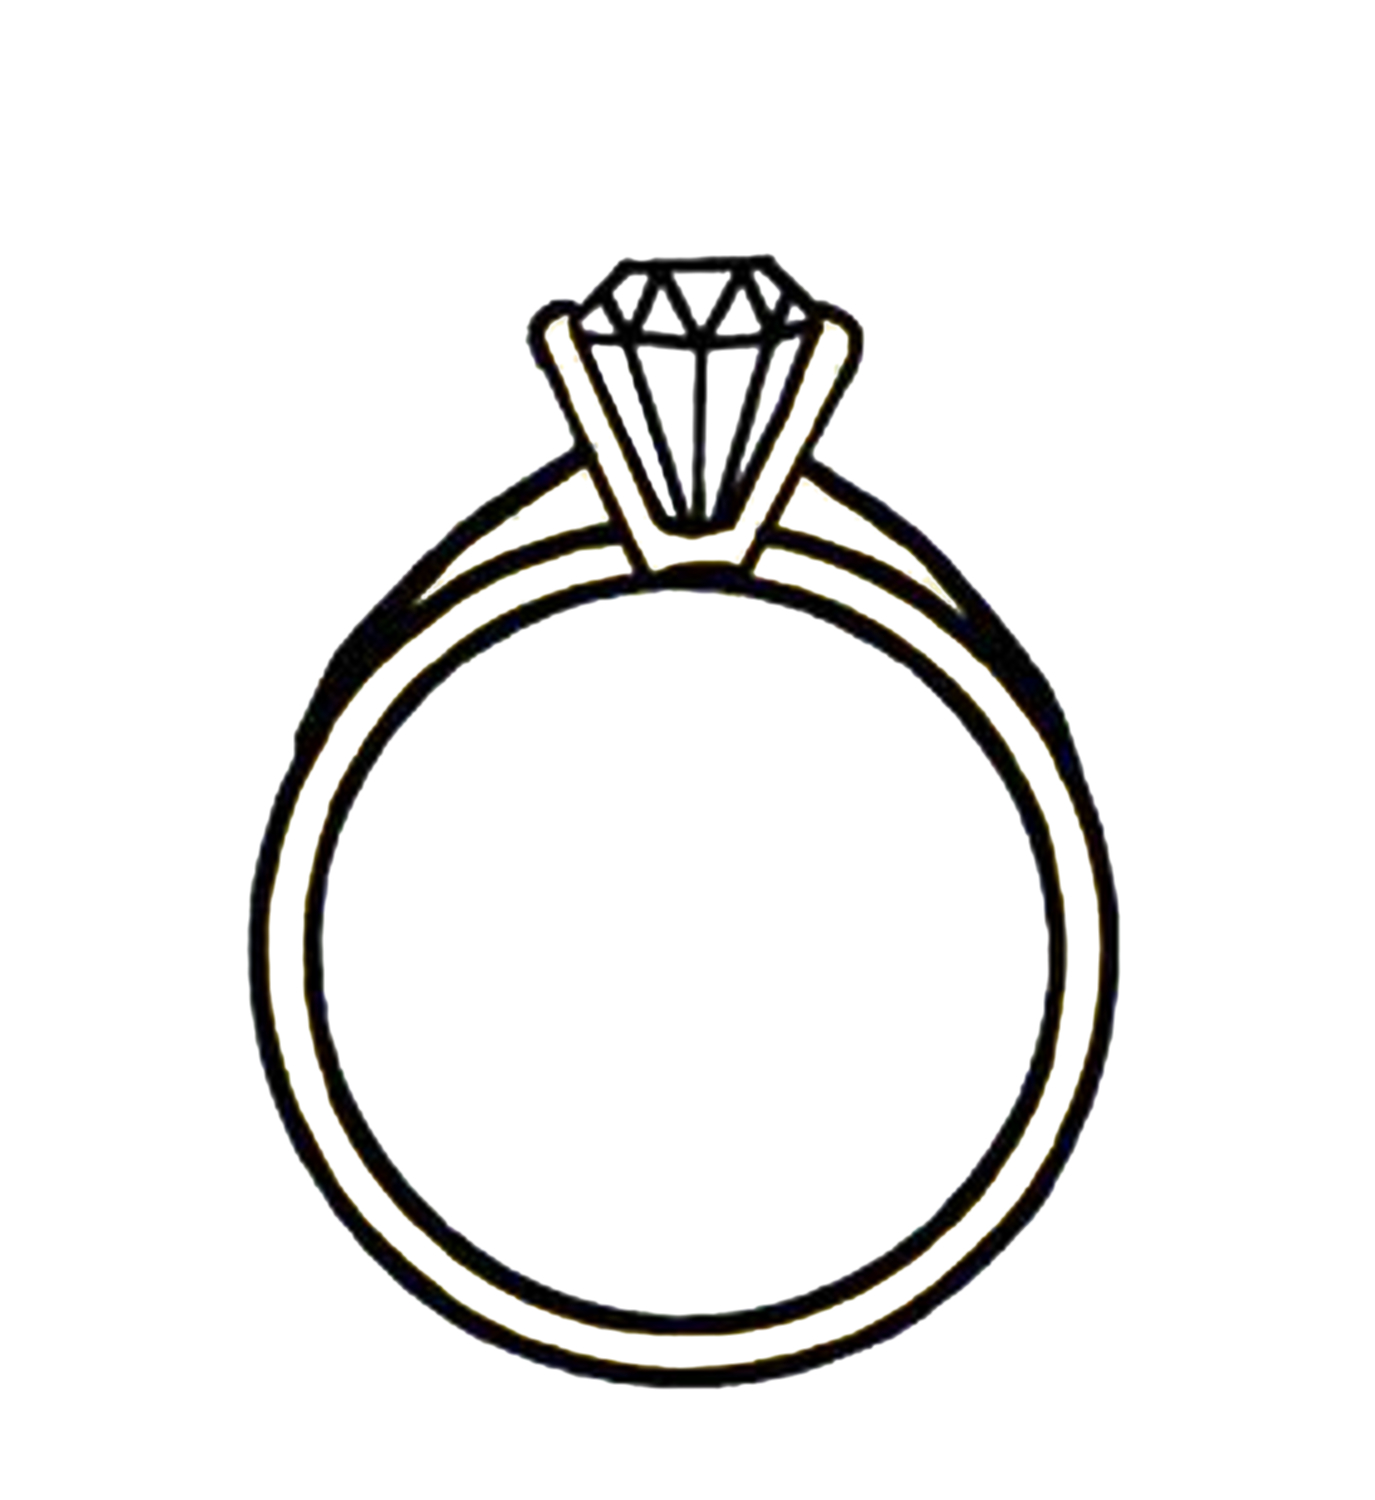 Linked wedding rings clipart free clipart images 3